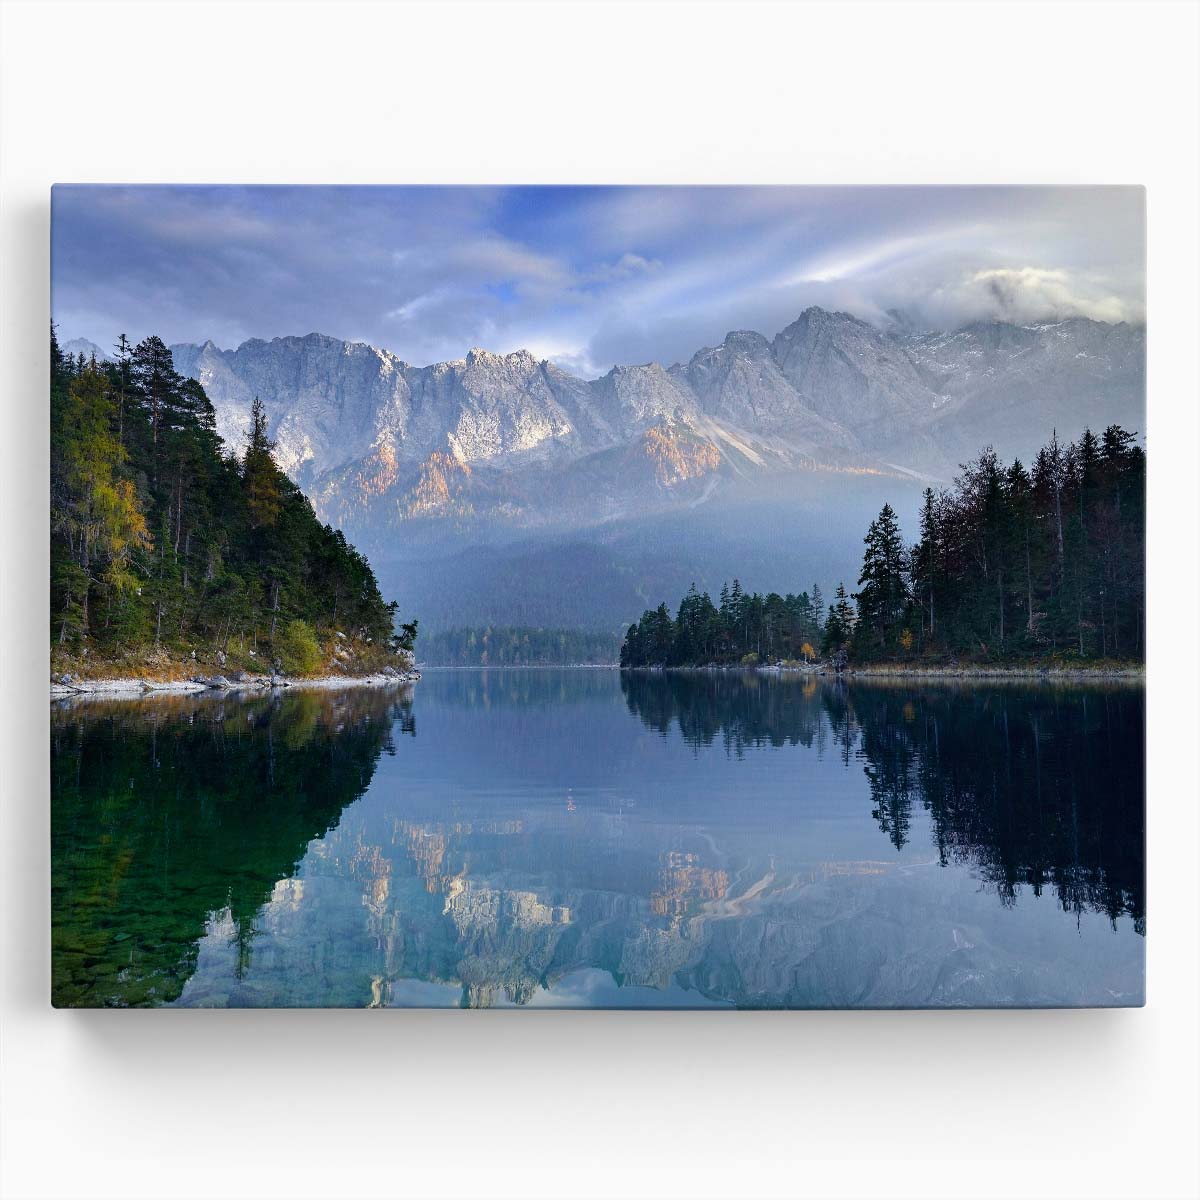 Zugspitze Eibsee Autumn Reflection Landscape Wall Art by Luxuriance Designs. Made in USA.